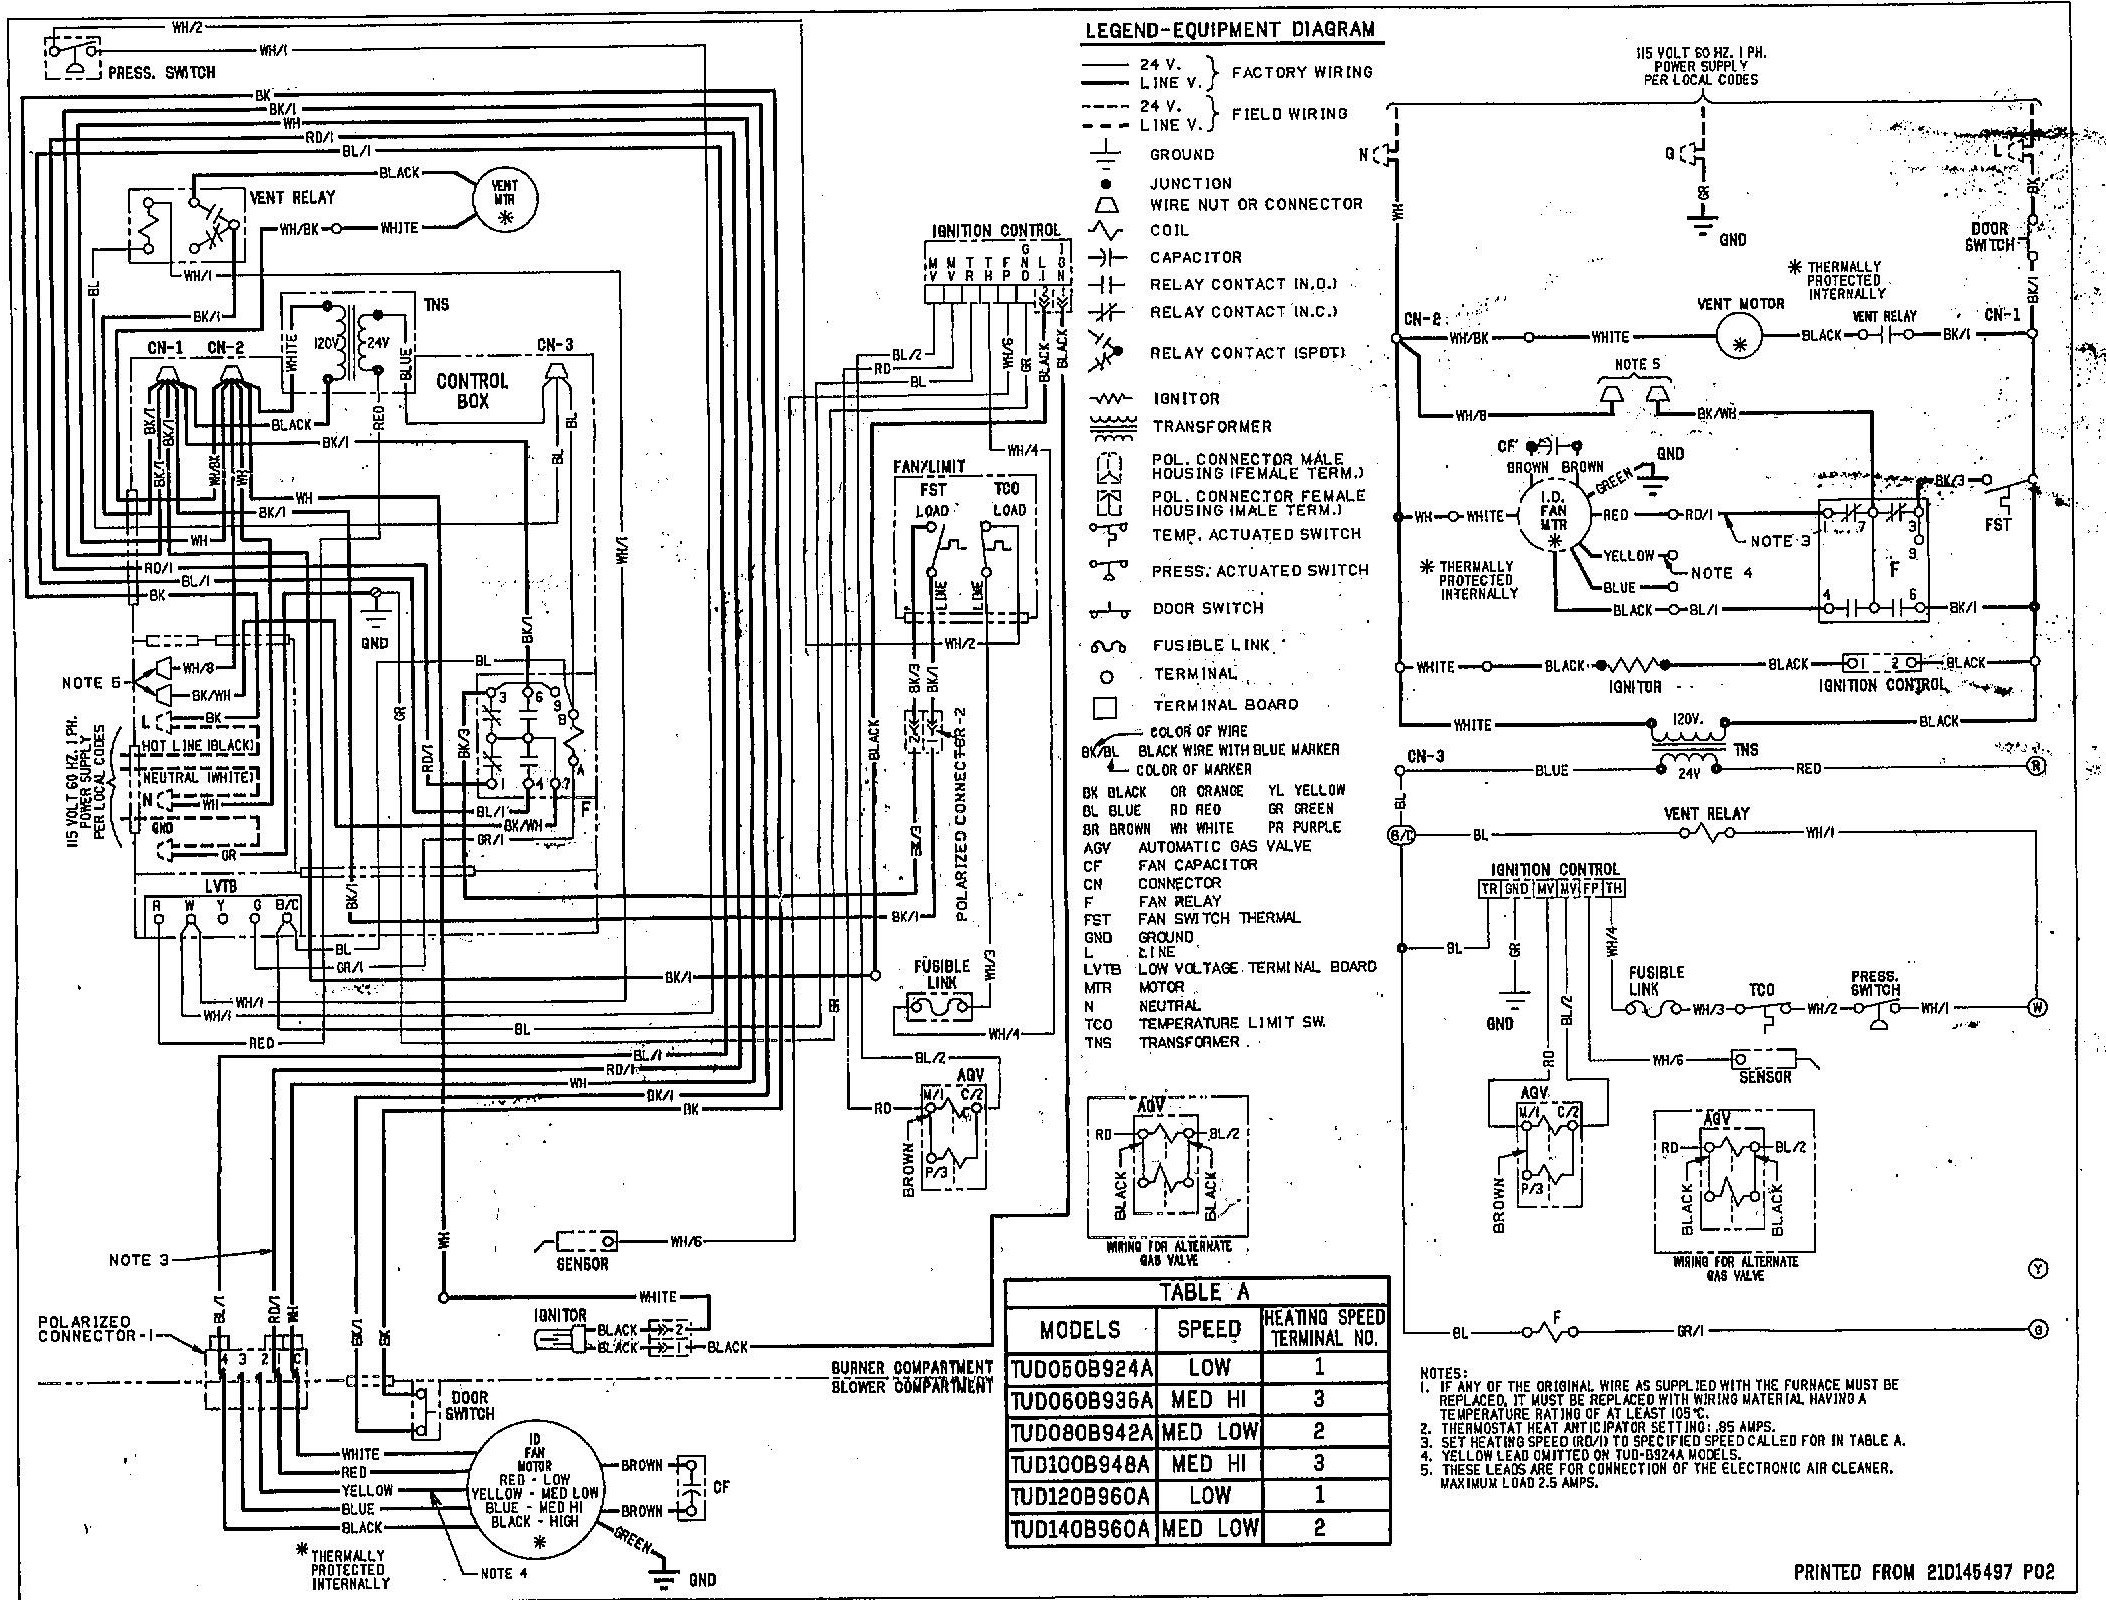 Trane Air Conditioner Wiring Diagram Wiring Diagram Trane tonnage Chart Beauteous Afif Of Trane Air Conditioner Wiring Diagram